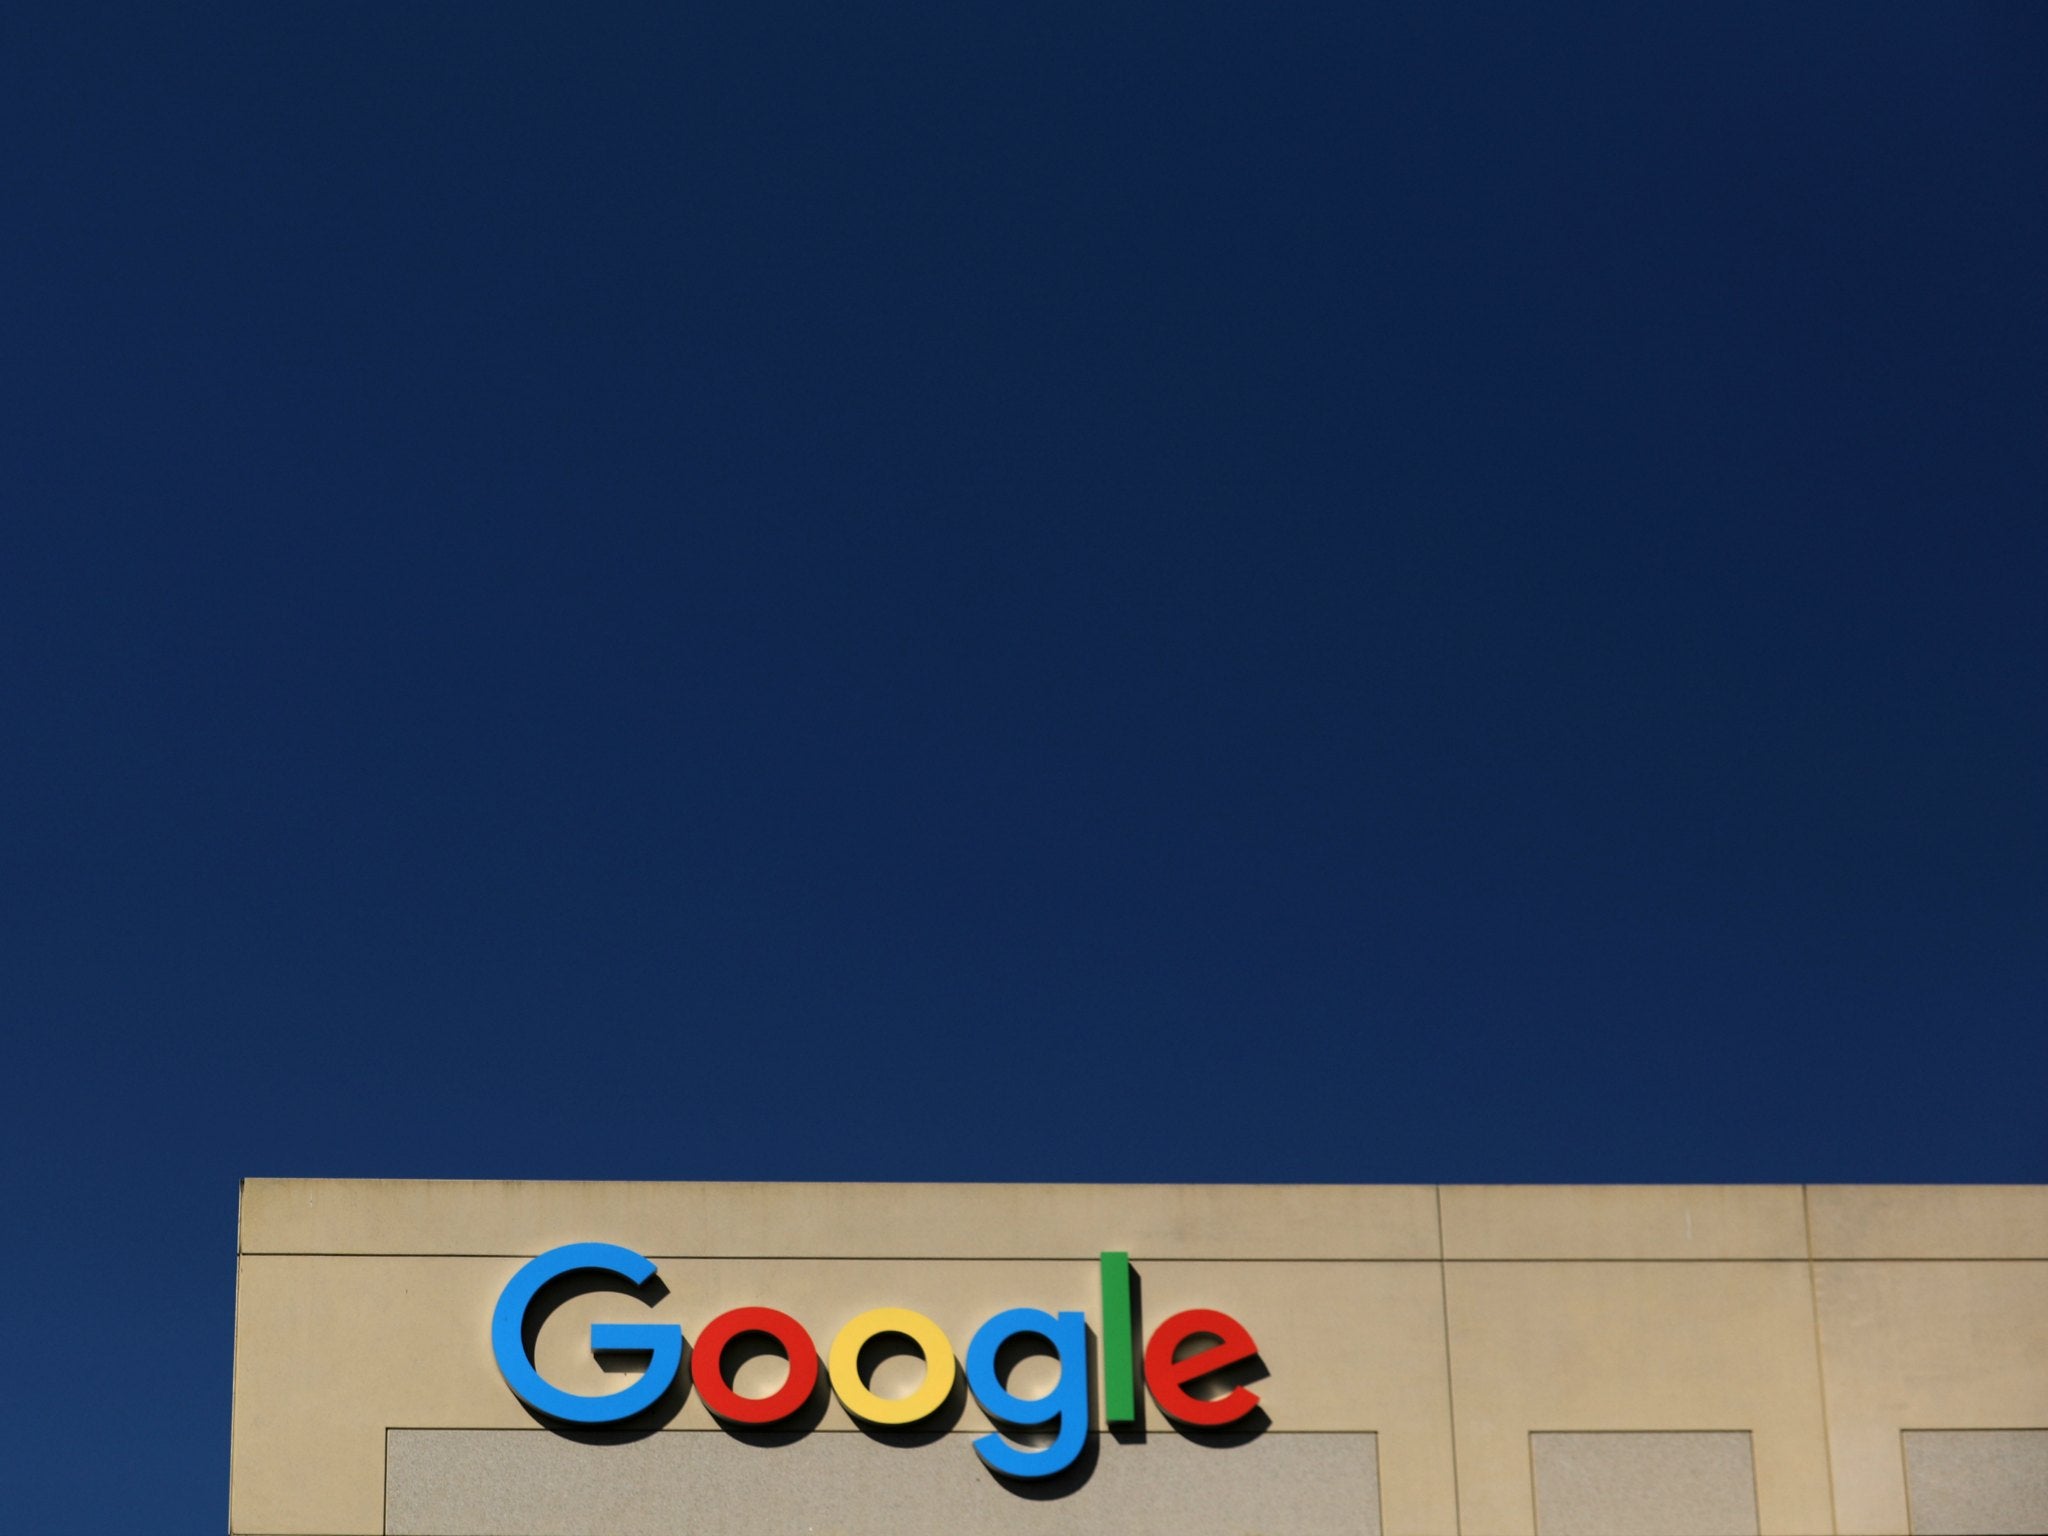 The Google logo atop an office building in Irvine, California, on August 7, 2017.